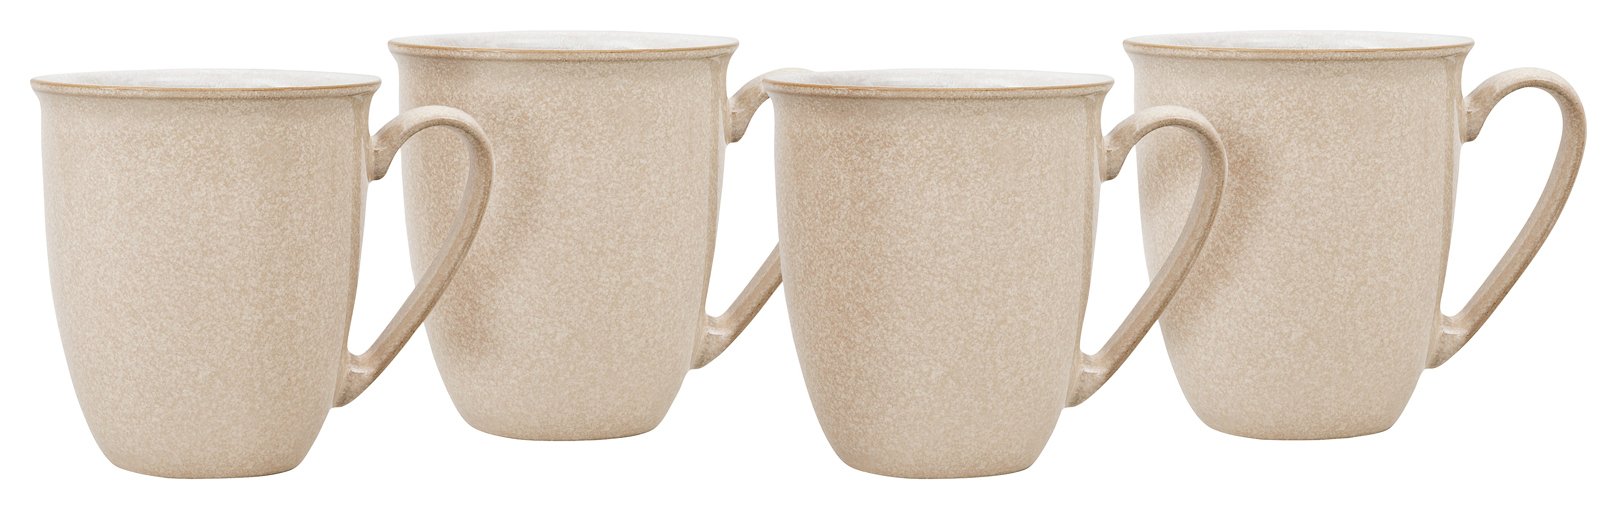 Denby Elements Set of 4 Coffee Mugs - Natural